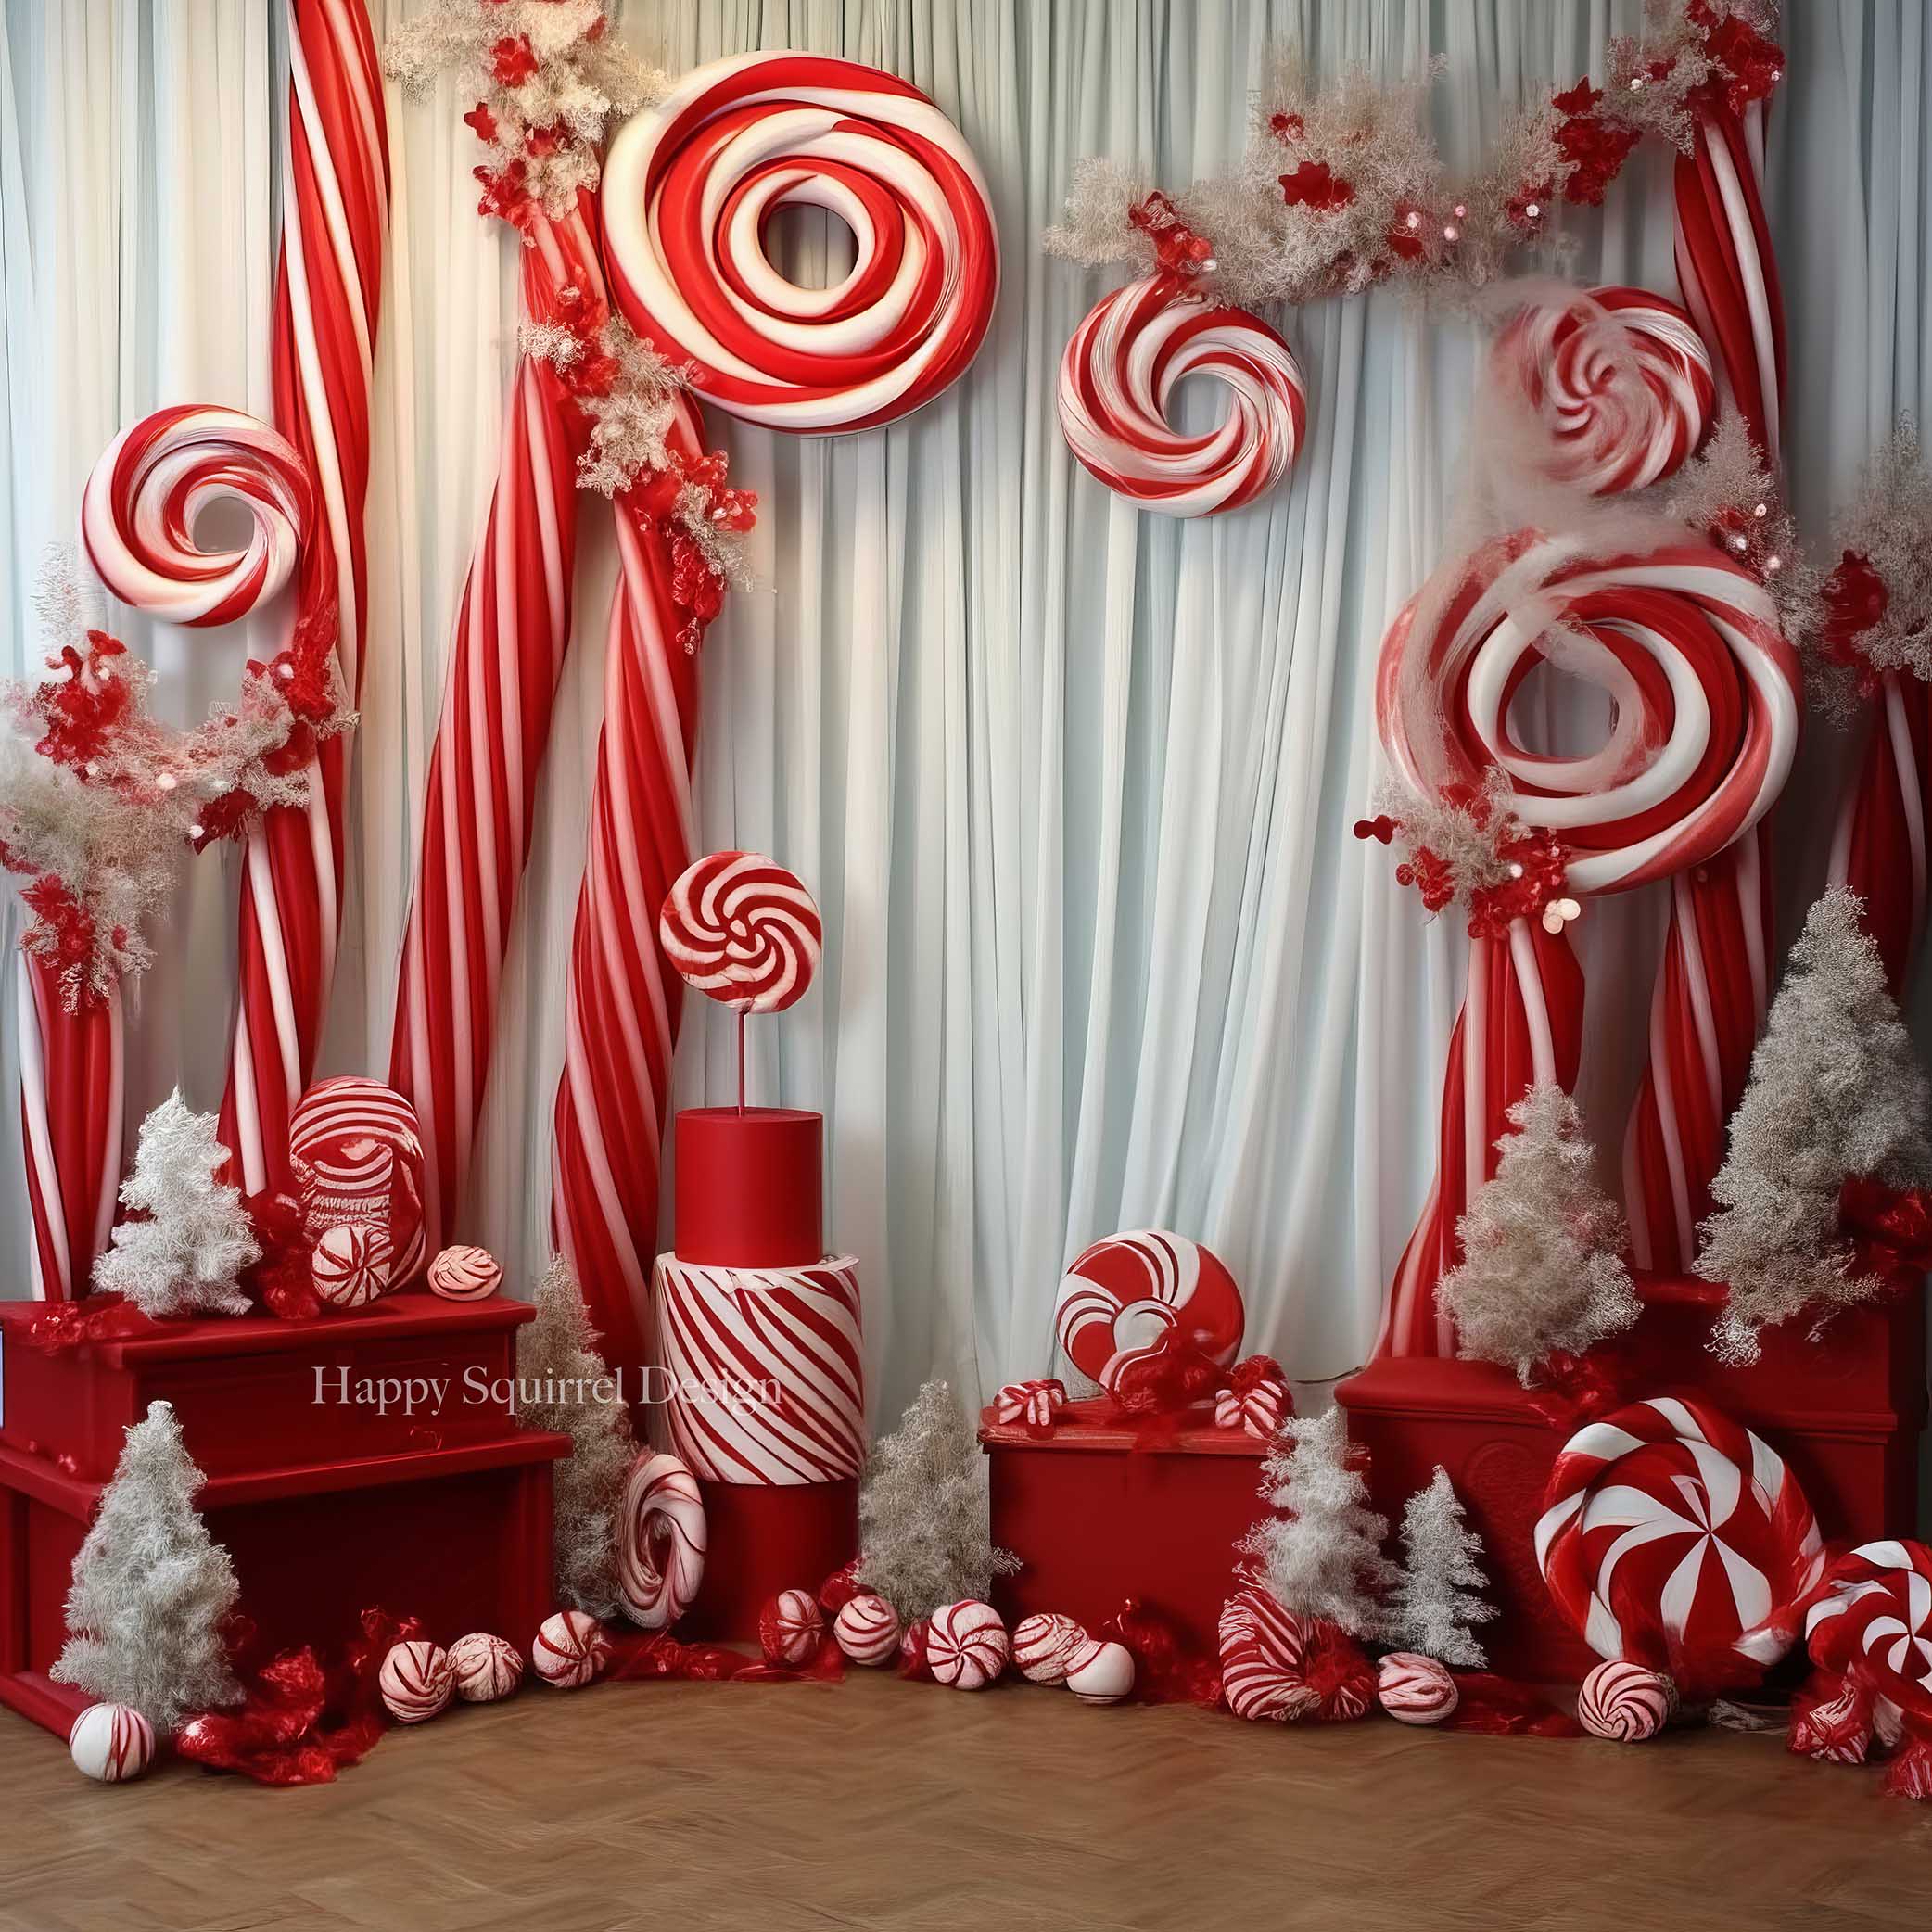 Kate Winter Christmas Candy Cane Room Backdrop Designed by Happy Squirrel Design